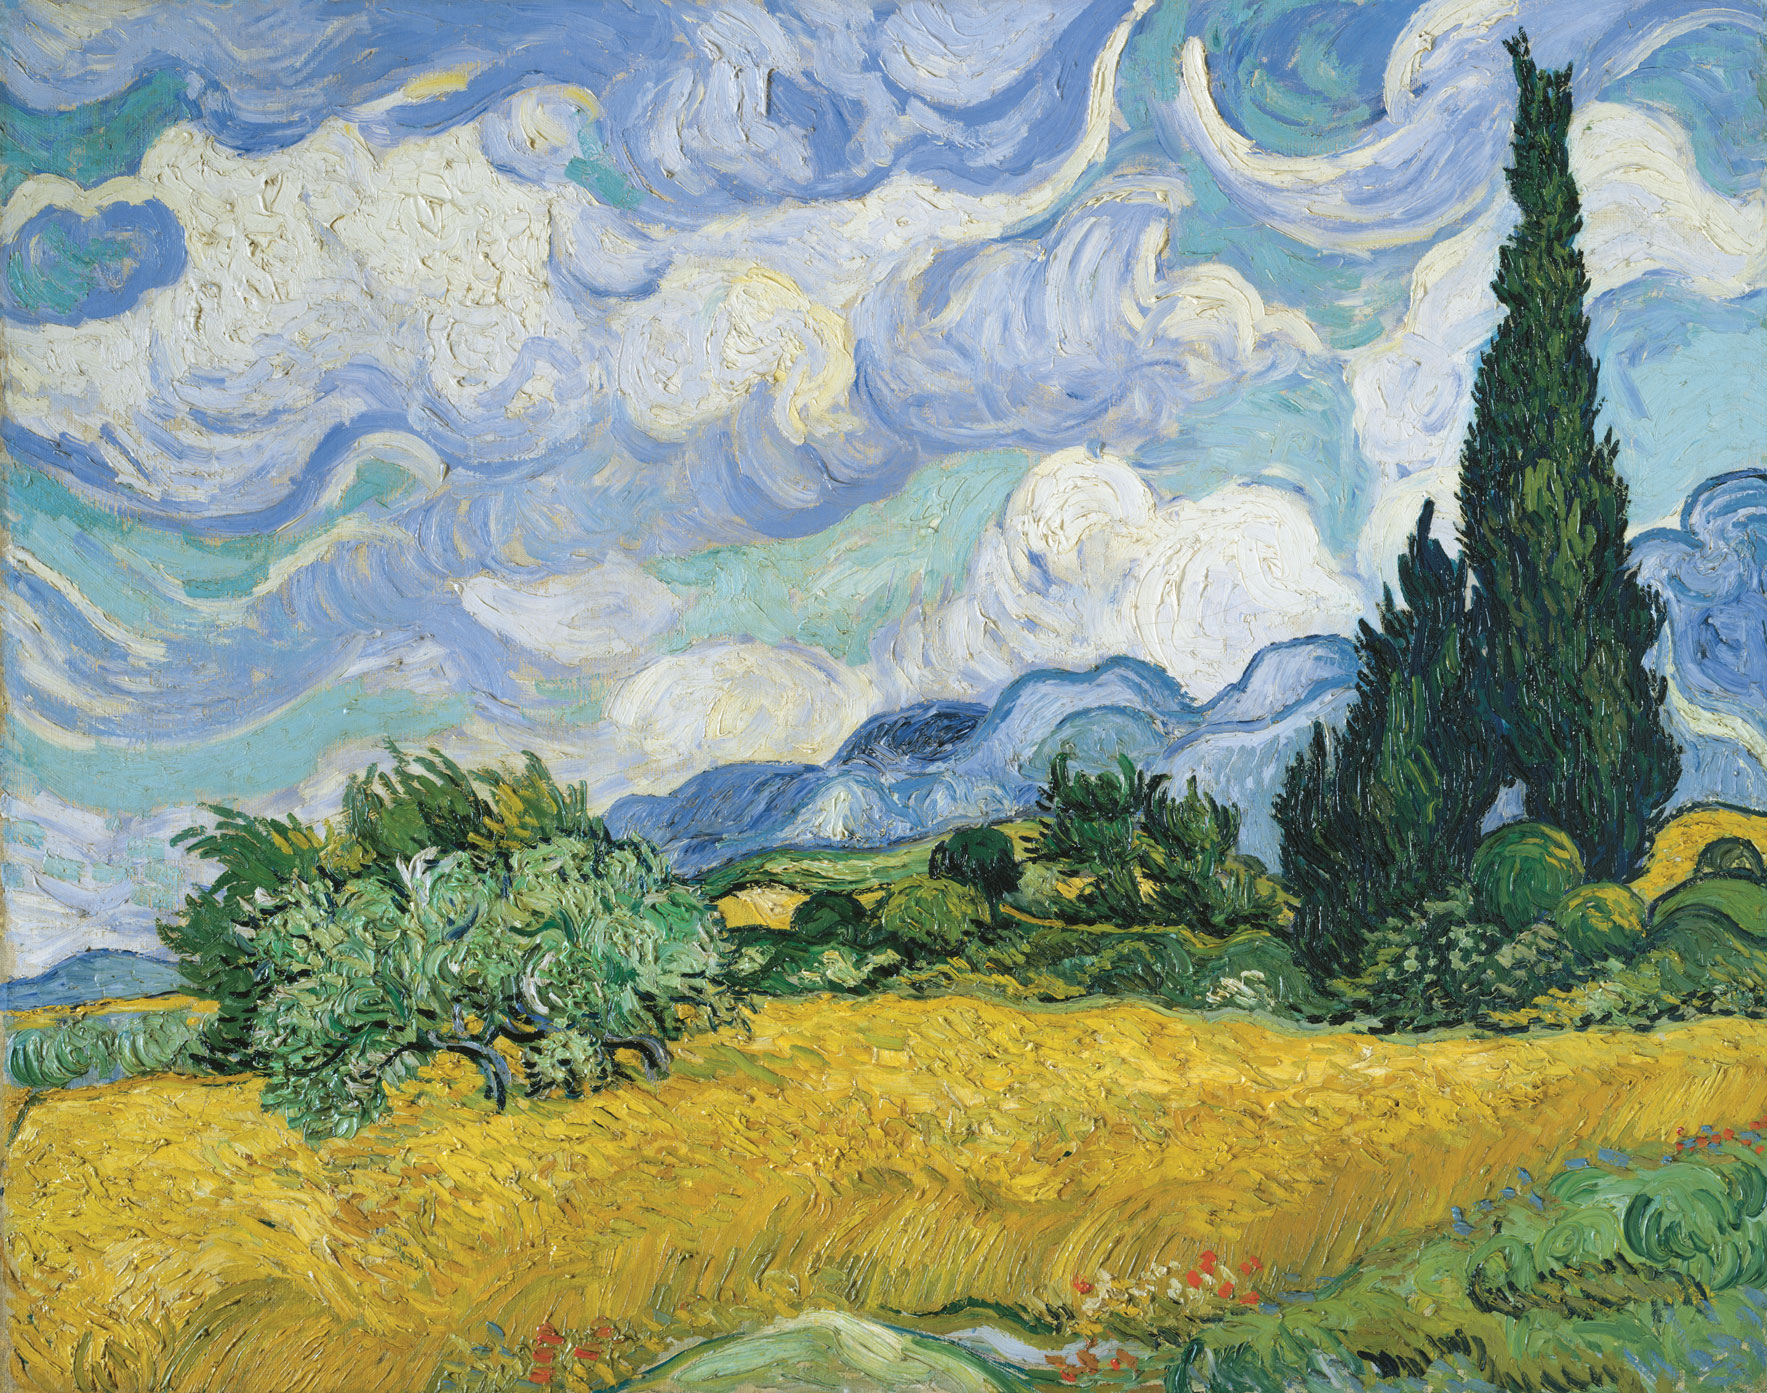 A staggering array of artists’ depictions of landscape assault your eye, and you home in on a soothing painting by van Gogh called Wheat Field with Cypress. From Art =